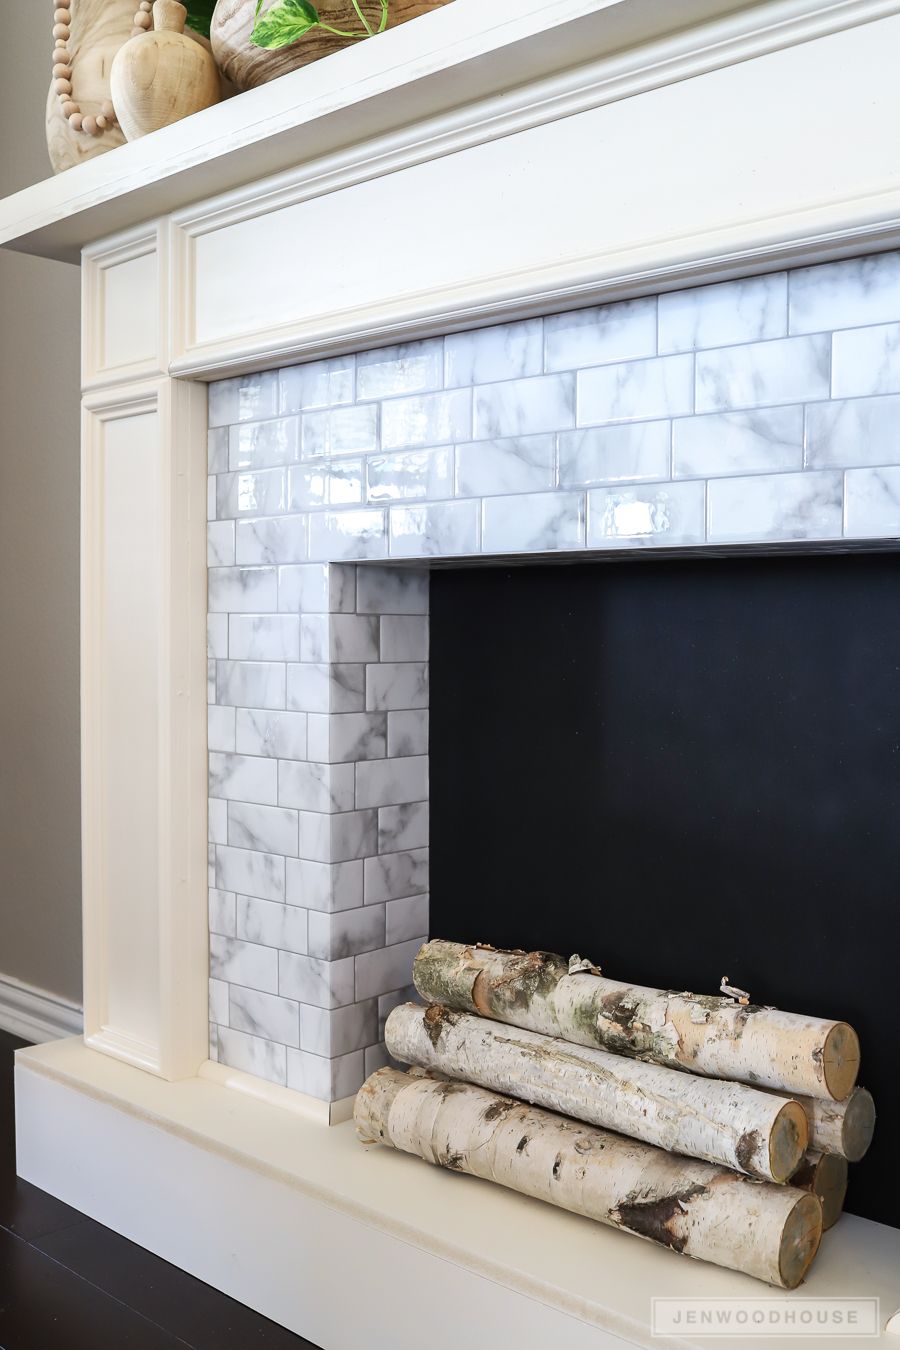 Building A Faux Fireplace Beautiful How to Make A Diy Faux Fireplace Featuring Smart Tiles